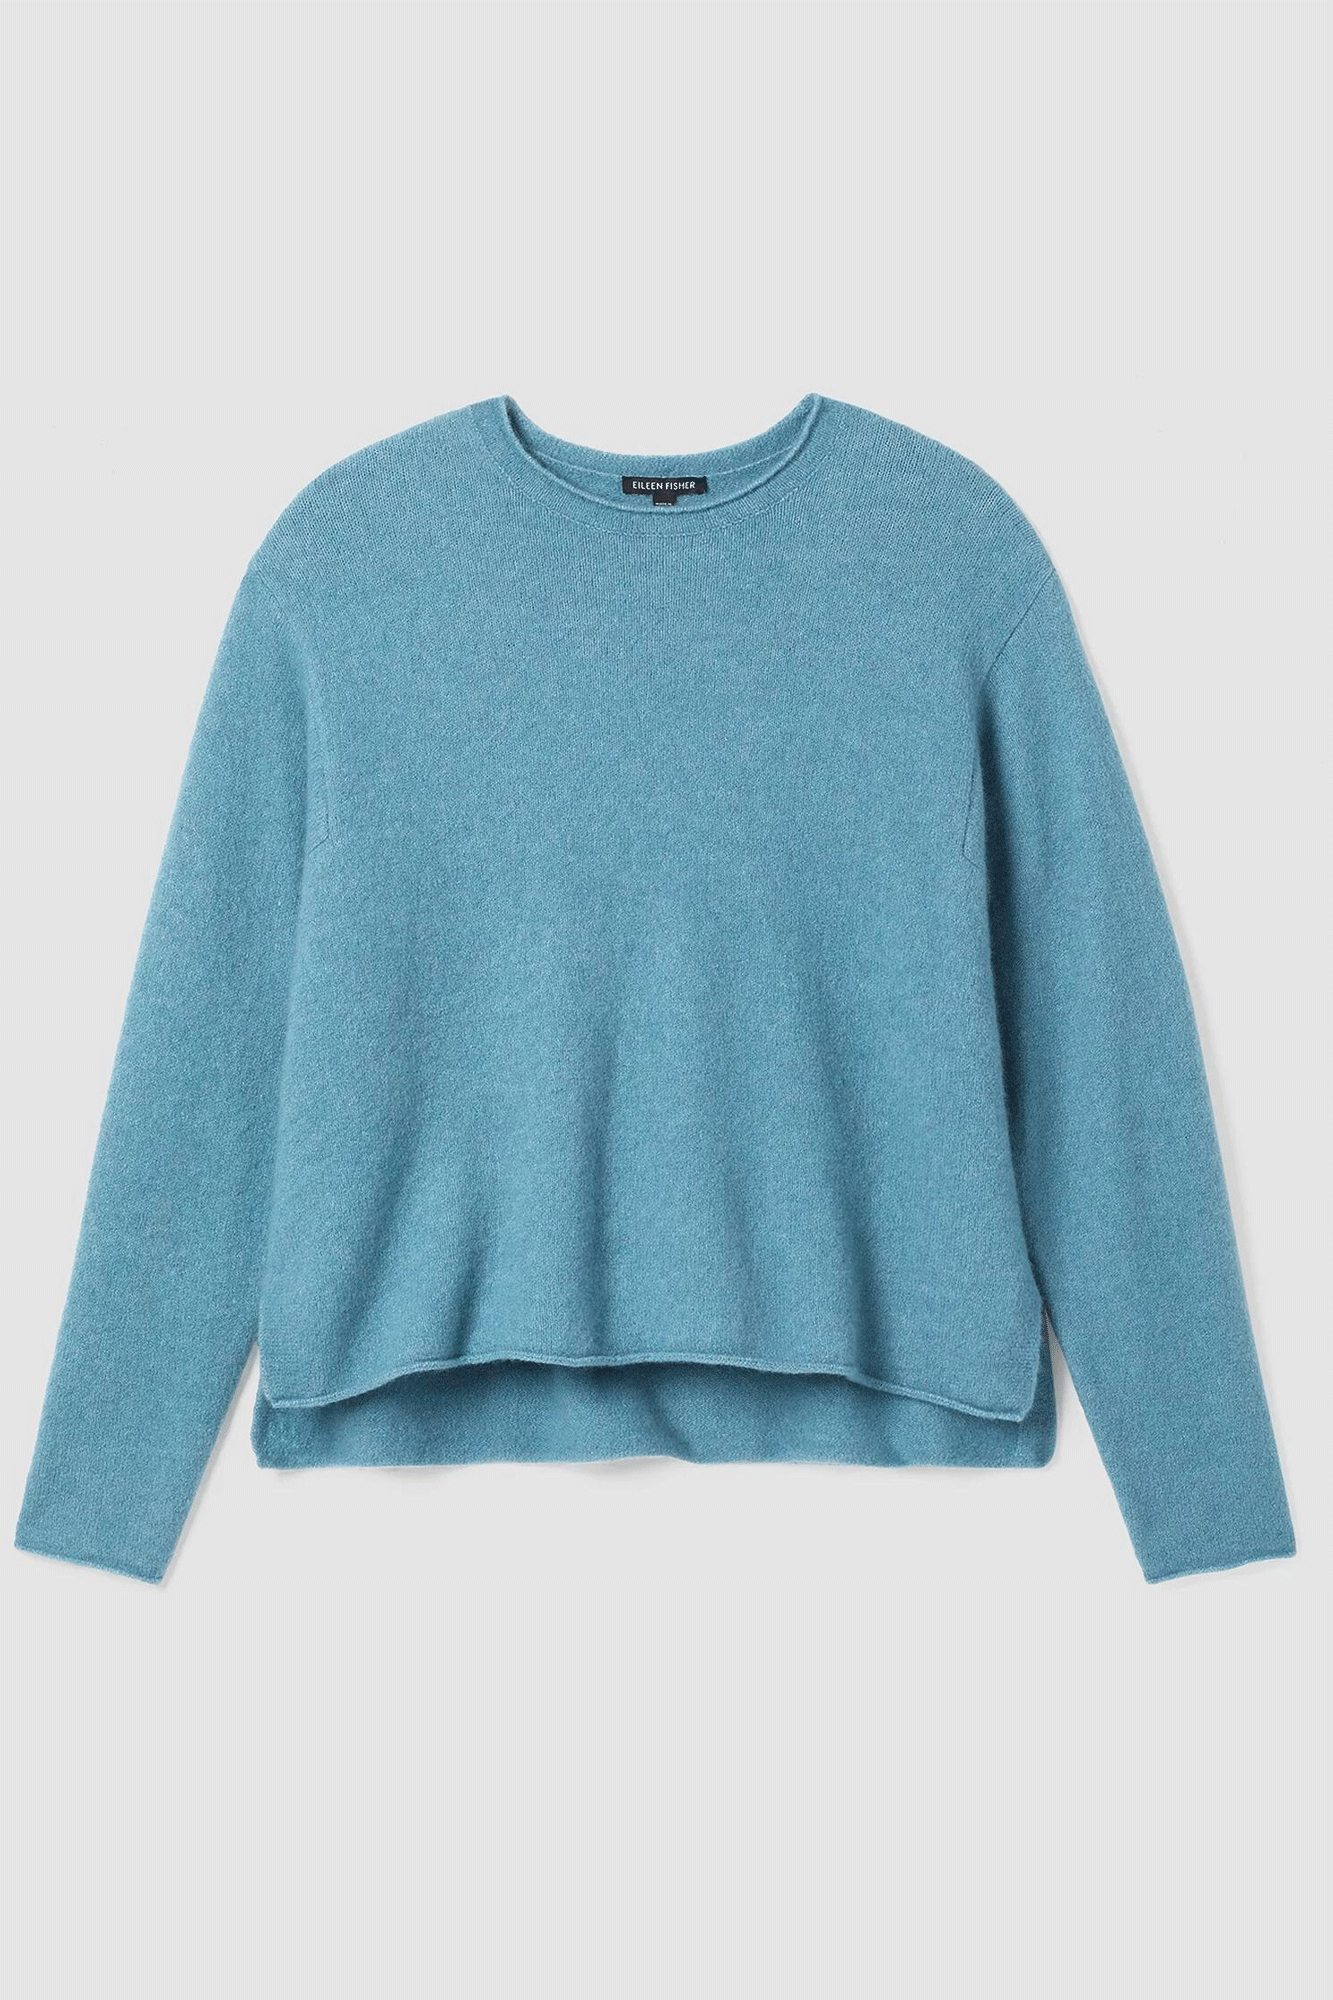 This Crew Neck Box Top from Eileen Fisher is designed for ultimate comfort without compromising style. Crafted from a luxurious blend of cashmere and silk, it has a simple silhouette with soft texture and subtle side slits. Enjoy all-season coziness and elegance.